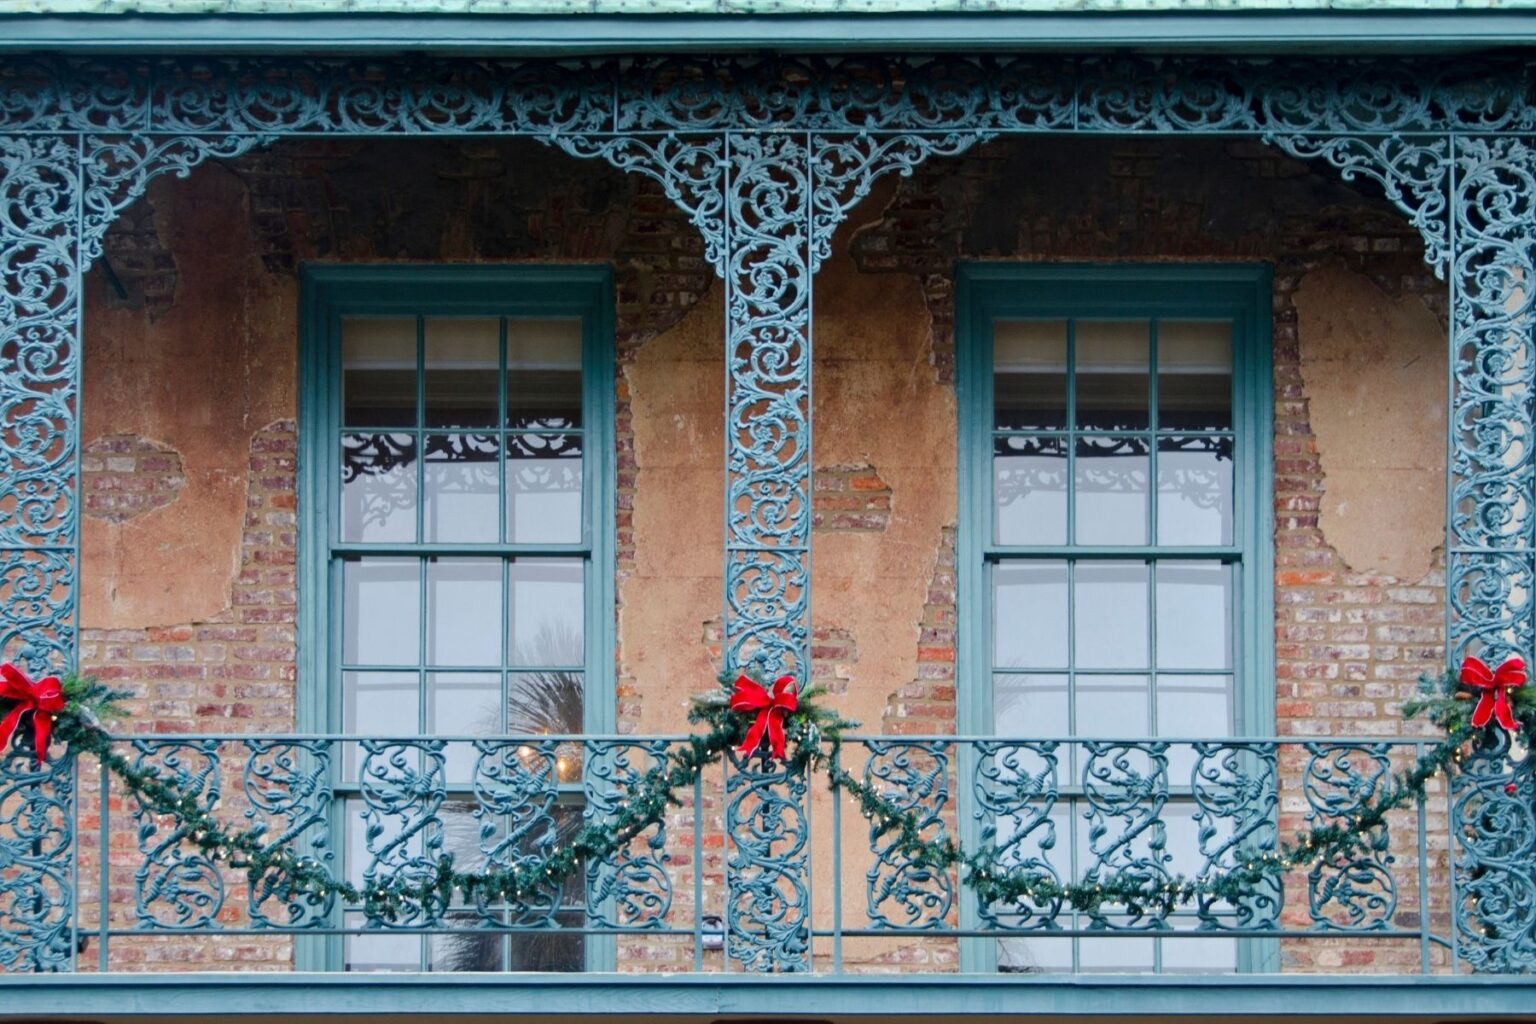 A property with holiday wreaths in Charleston in December